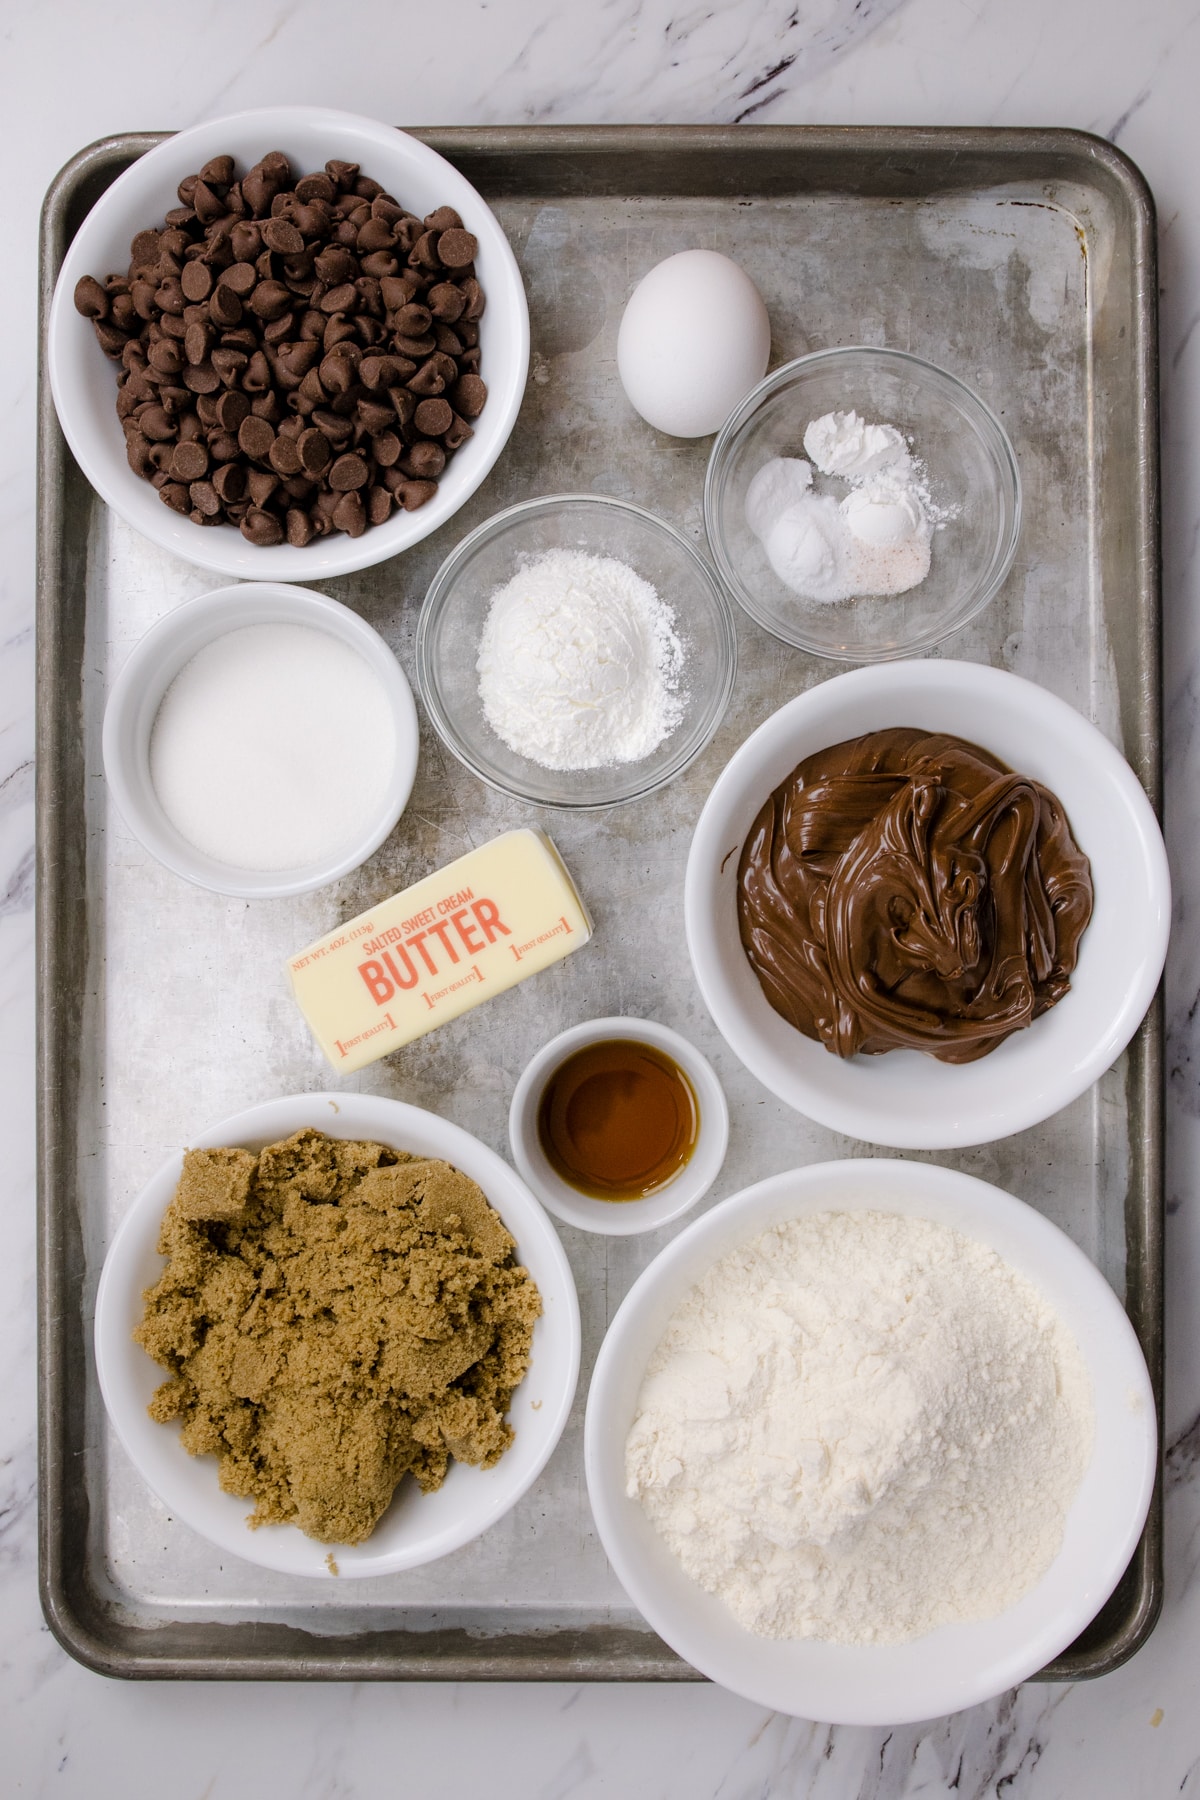 Top view of ingredients needed to make Nutella Cookies in small bowls on a baking tray.